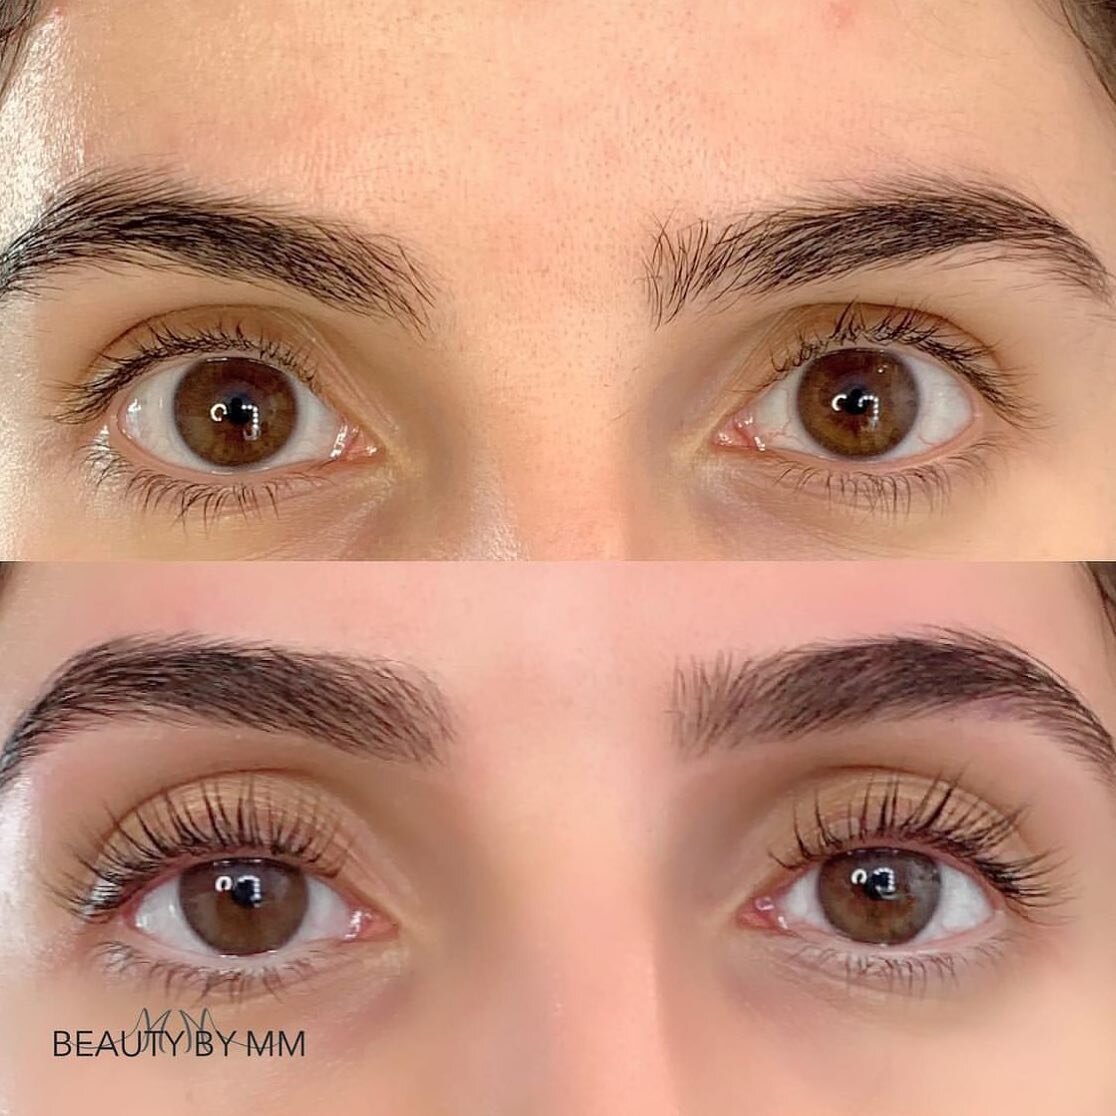 BROWS TO DIE FOR @beautybymmla 

#eyebrows #browshaping #brows